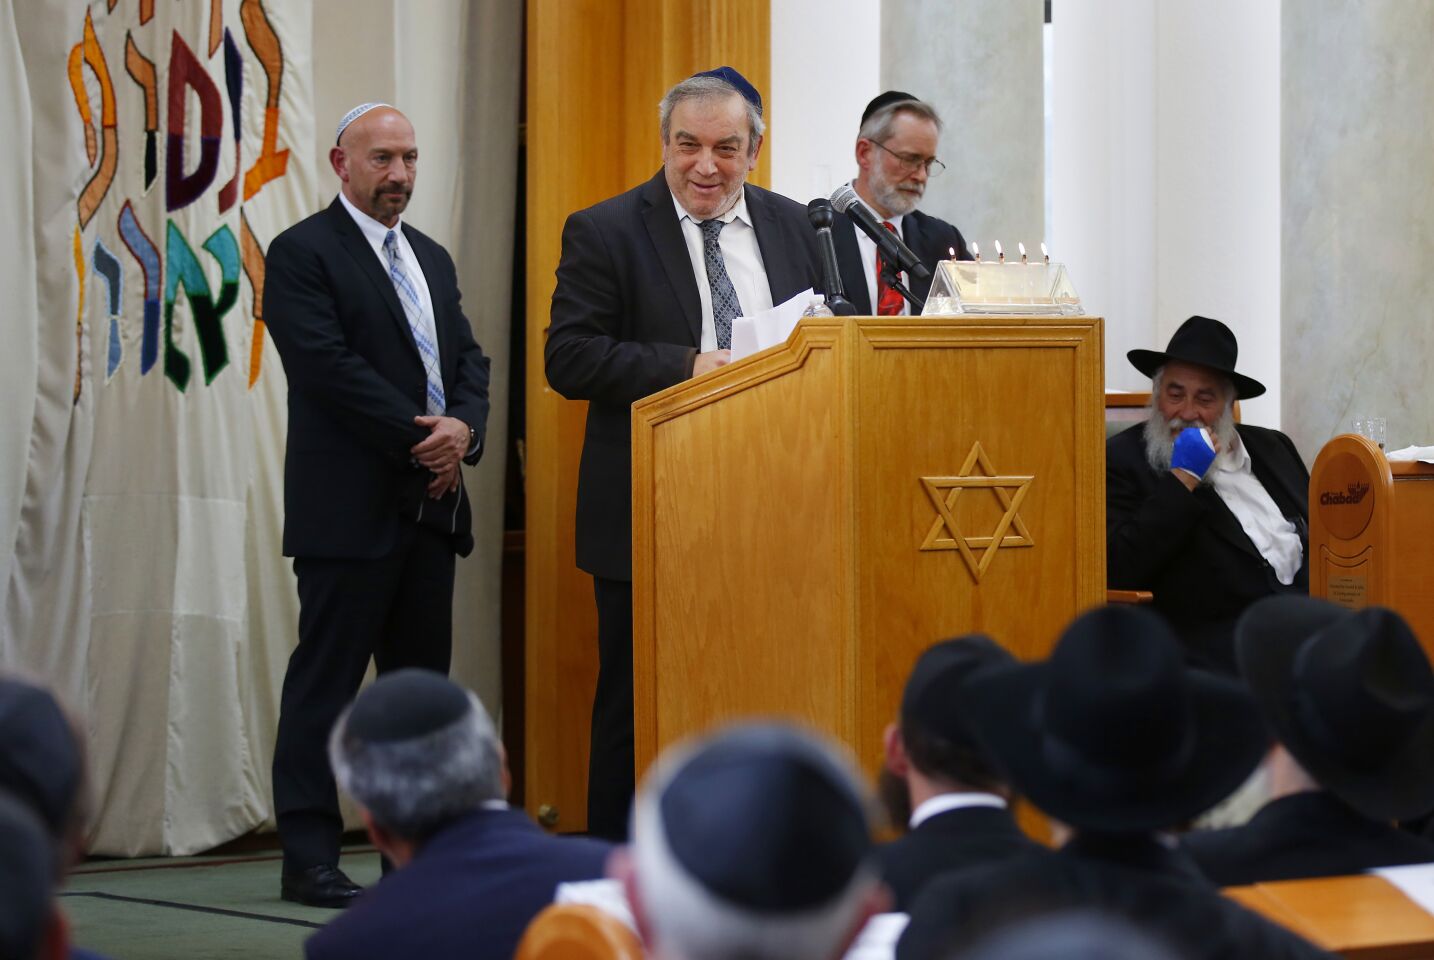 Howard Kaye speaks about his wife Lori Gilbert-Kaye, 60, during a service for her at the Chabad of Poway on April 28, 2019 in Poway, California. Gilbert-Kaye was killed by a gunman at the synagogue.